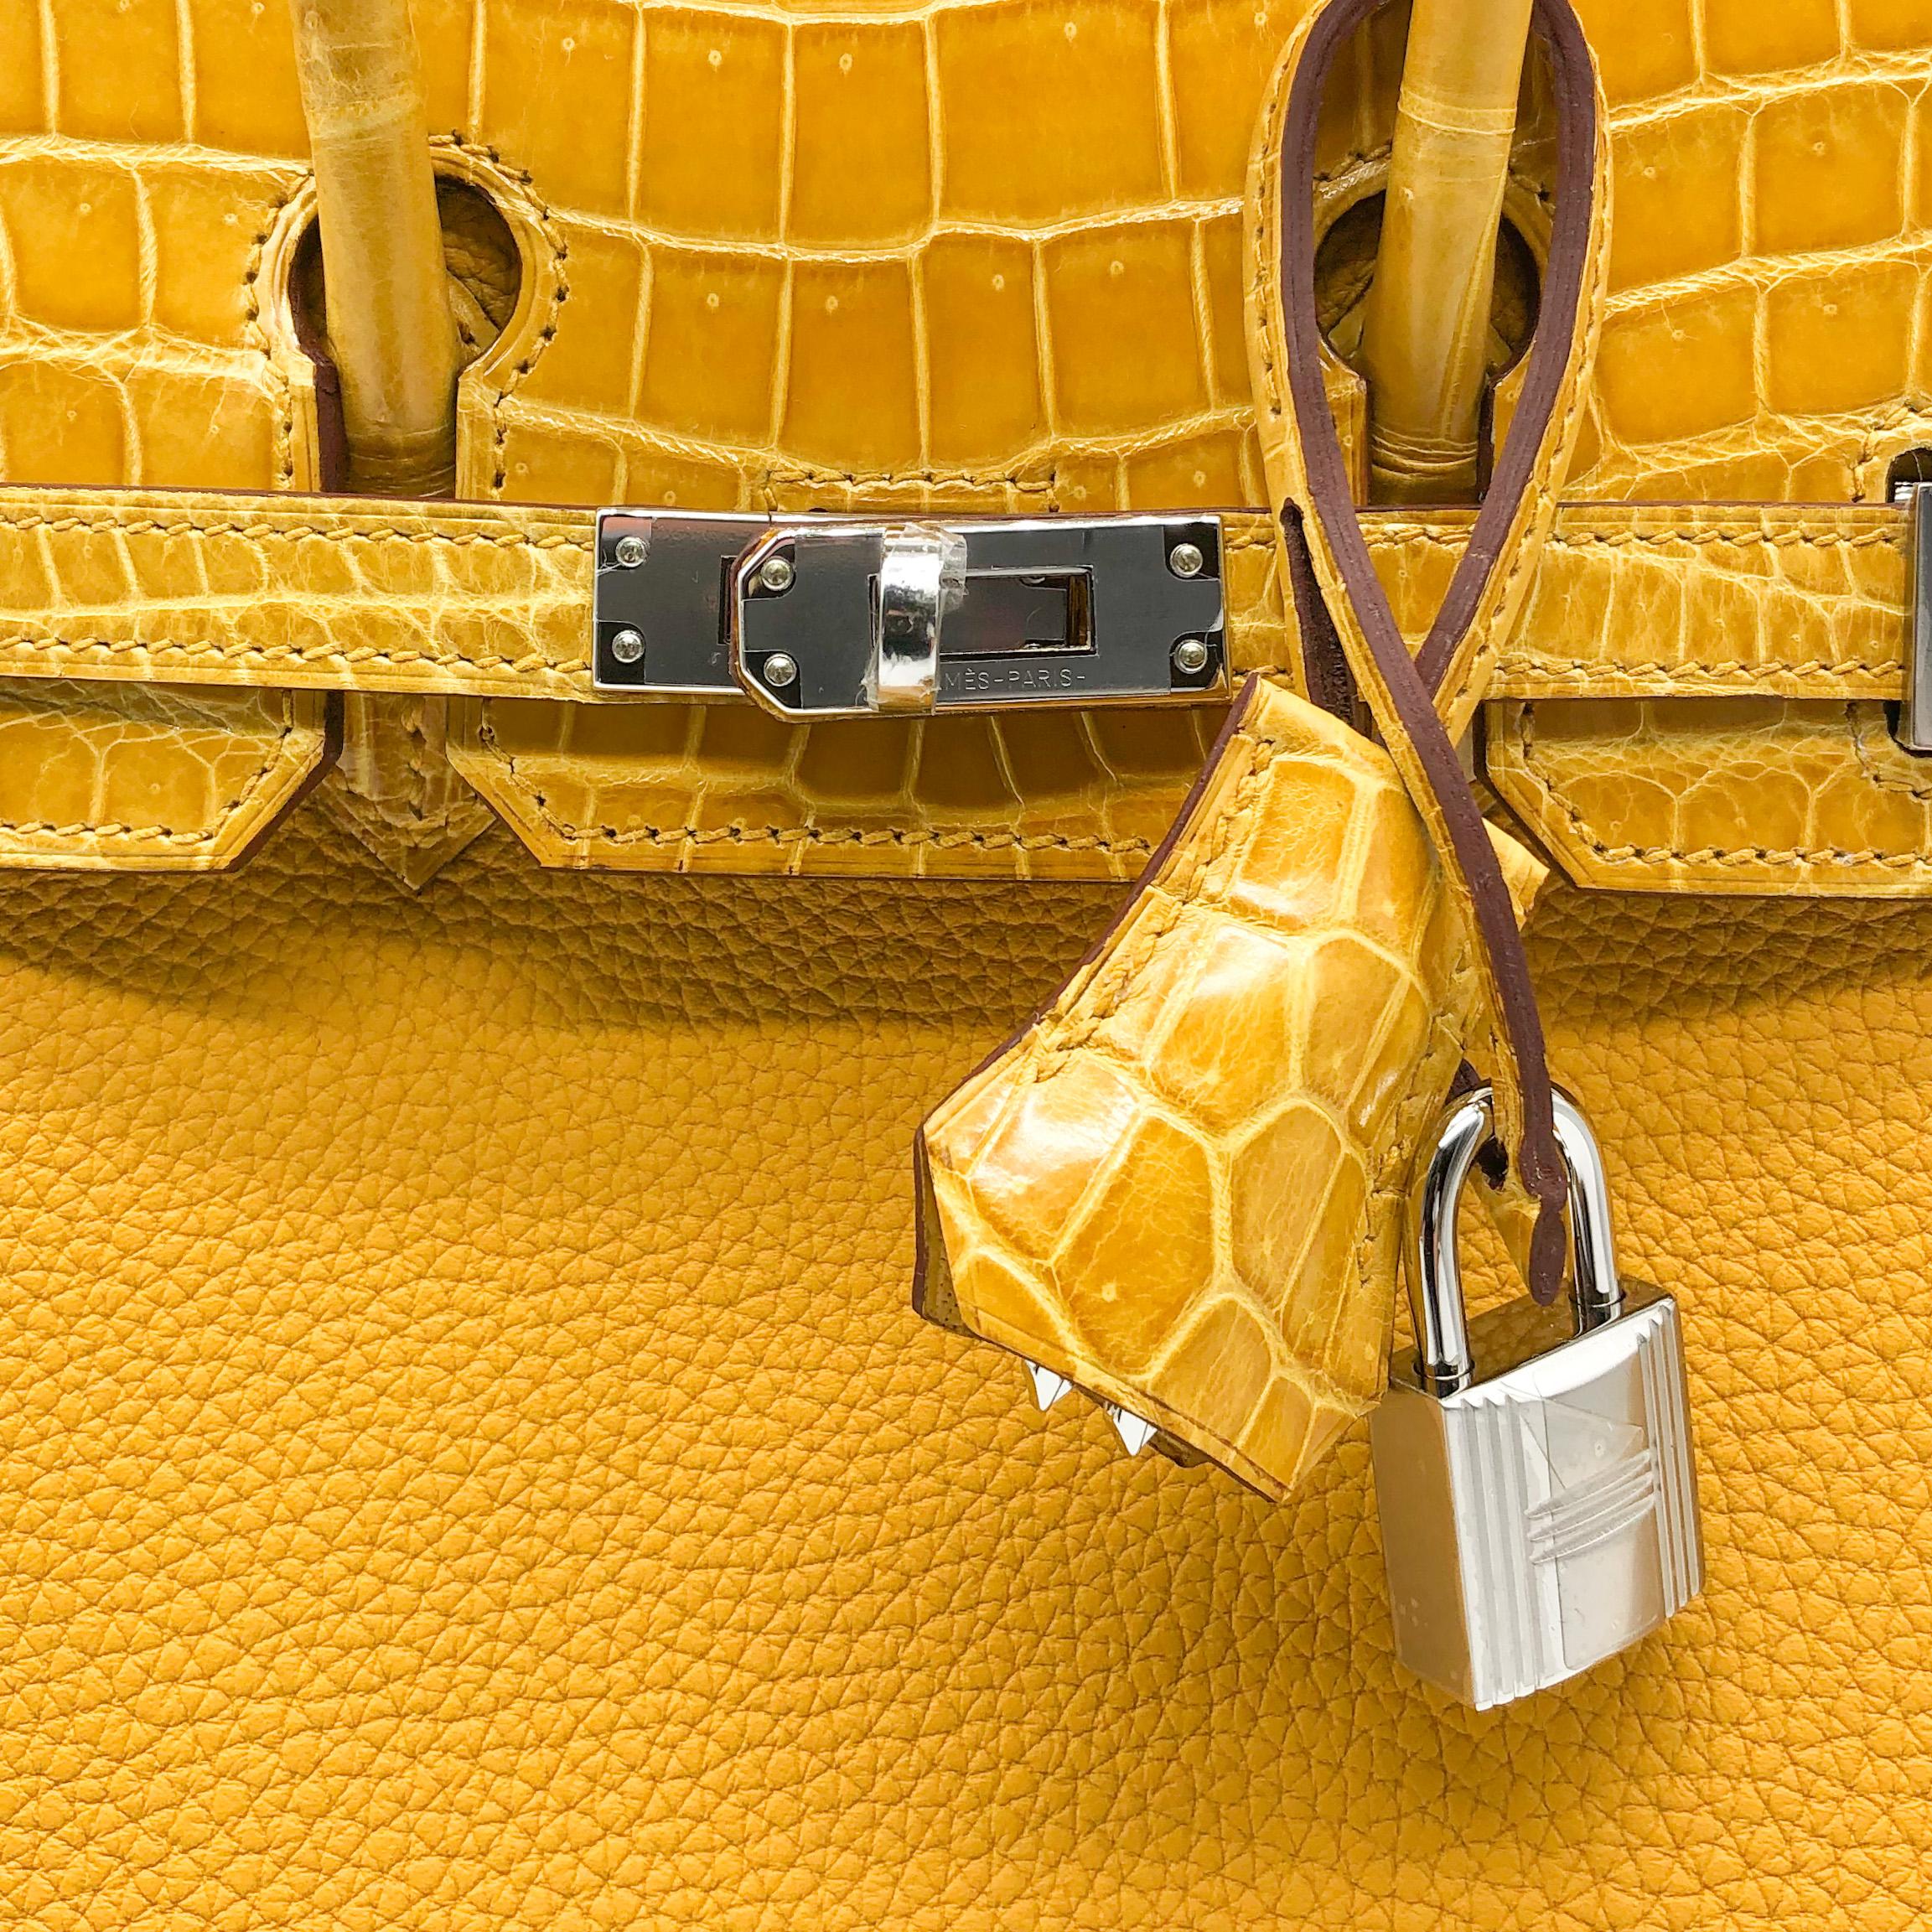 Hermès Birkin 25cm Touch Jaune Amber Togo Leather & Shiny Niloticus Crocodile In New Condition In Sydney, New South Wales